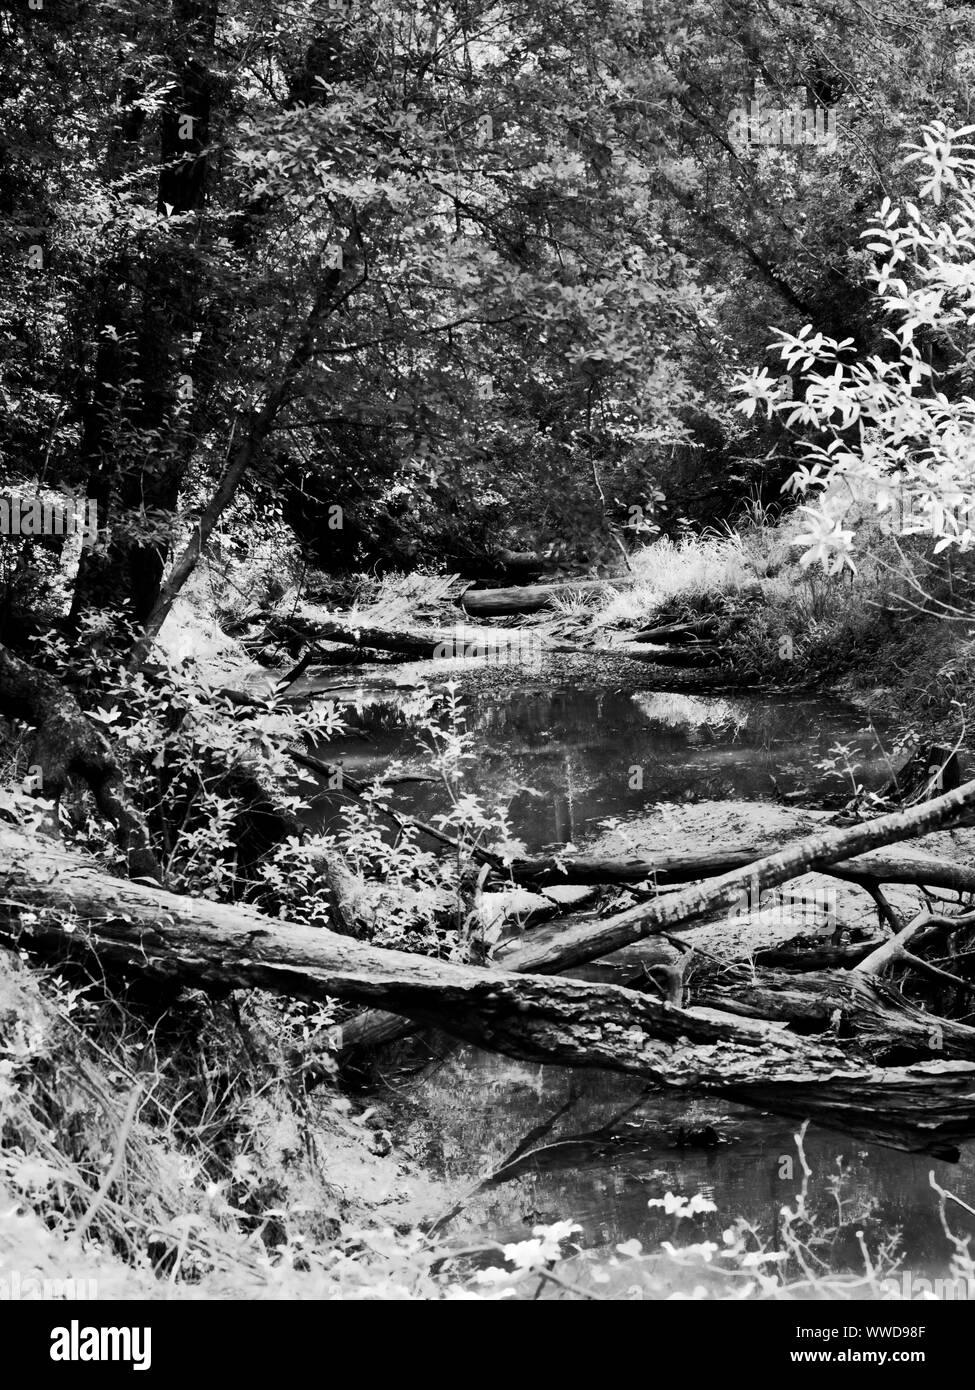 The Woodlands, TX USA - 08/23/2019  -  Fallen Trees Across The Creek in B&W Stock Photo